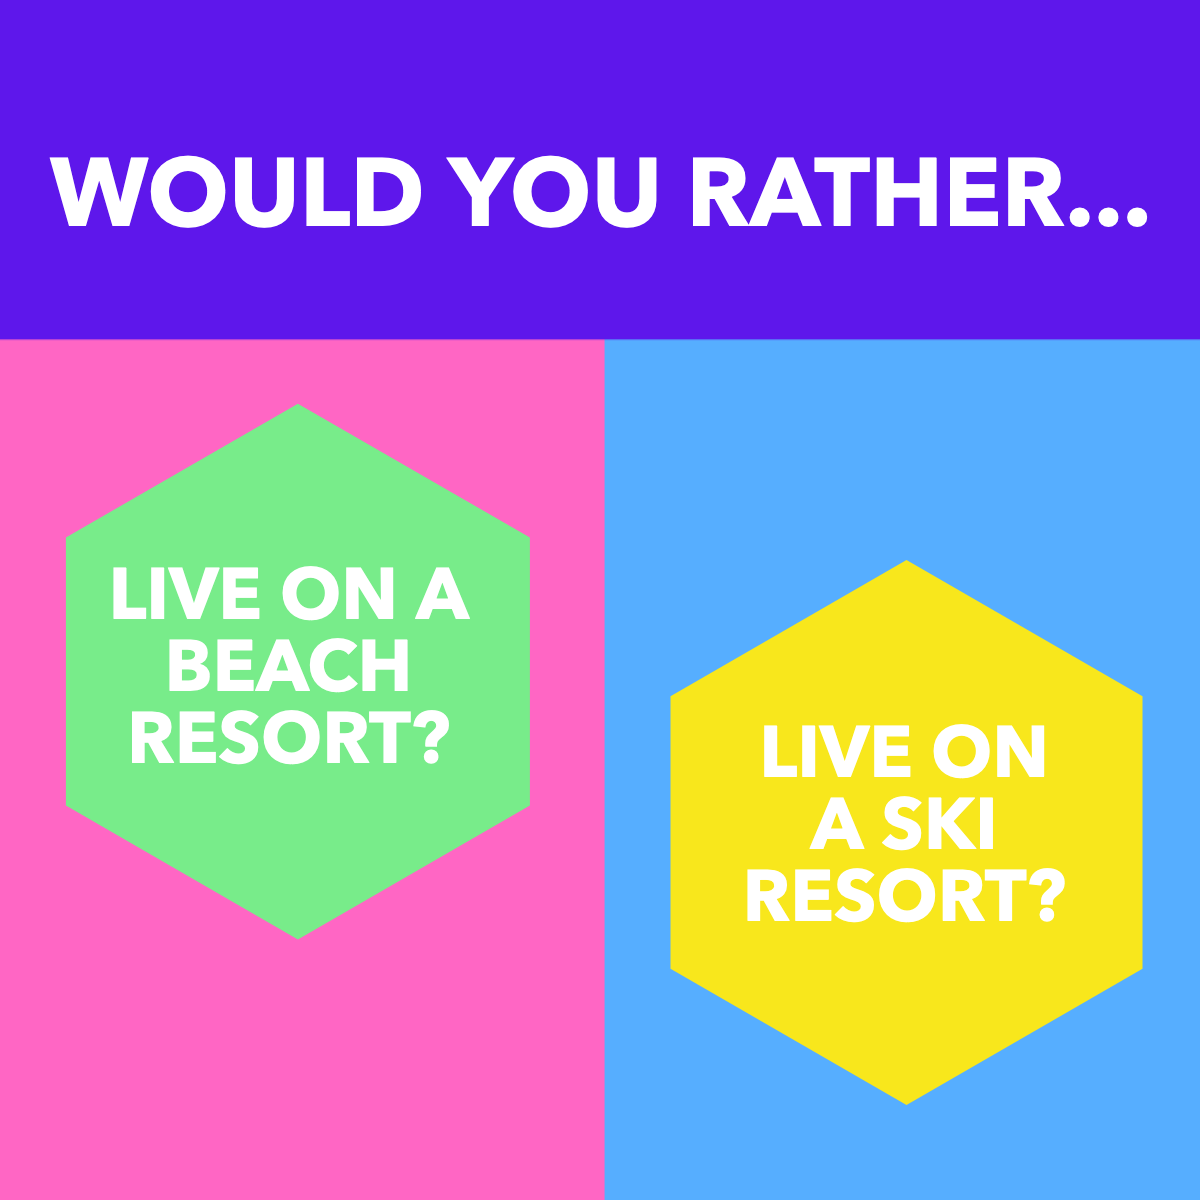 Would you rather... 

🏖️☀️ vs. 🏔️⛷️

#wouldyourather #beach #tannned #sun #snow #ski #cozy 
 #RealestateAppleton #Appletonwisconsin #AppletonWisconsinRealEstate #CharlesRobbinsRealtor